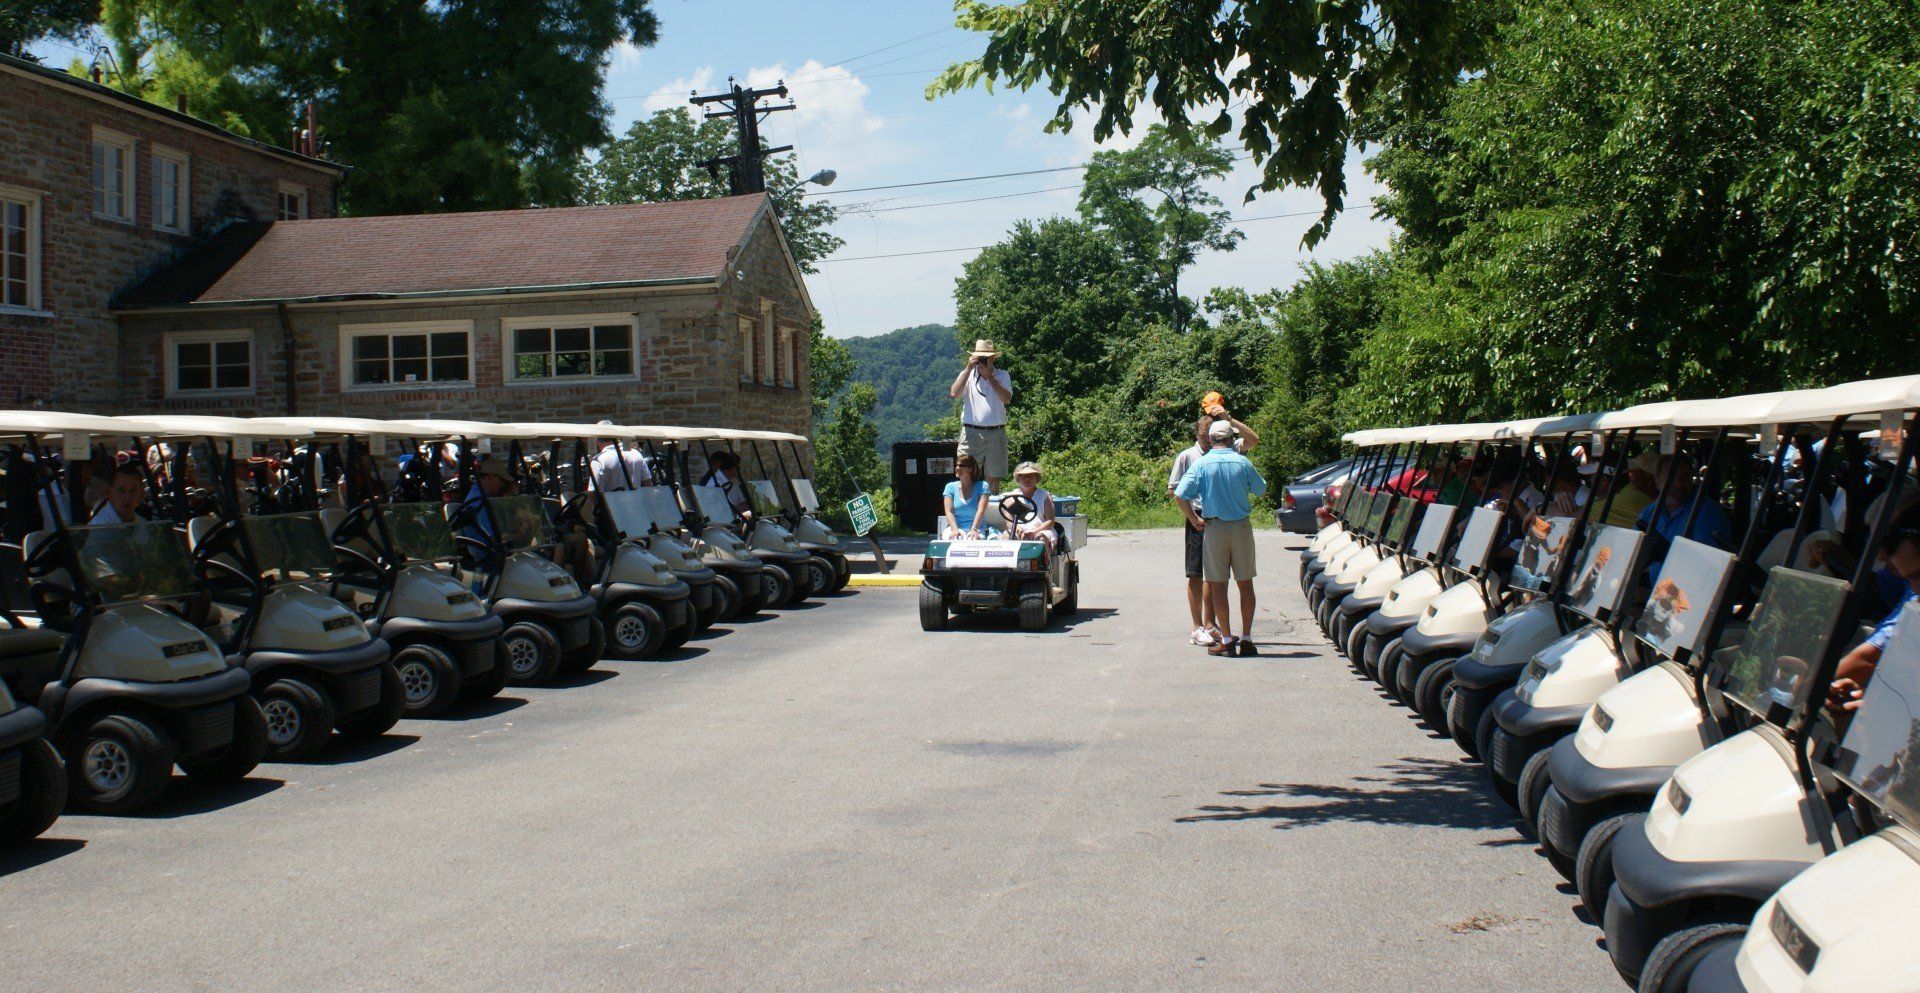 Riverview Catholics Golf Outing
Saturday, June 15, 2024
Join us for a round of golf at California Golf Course, followed by the 19th Hole - a catered dinner at St Rose Church